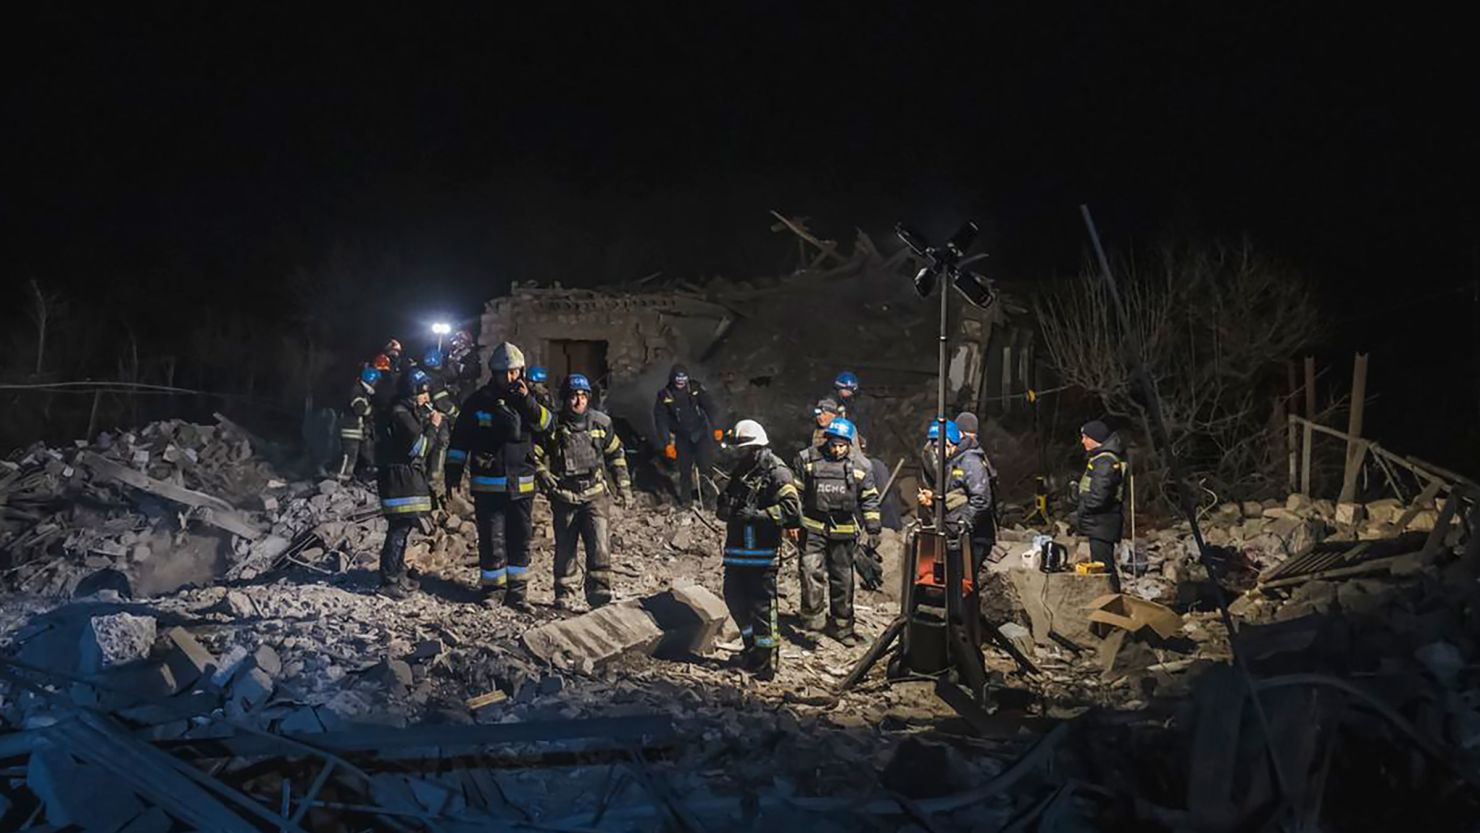 Ukrainian firefighters examine the site of Russia's missile attack that hit an apartment building in Pokrovsk, Ukraine, on Saturday, January 6.